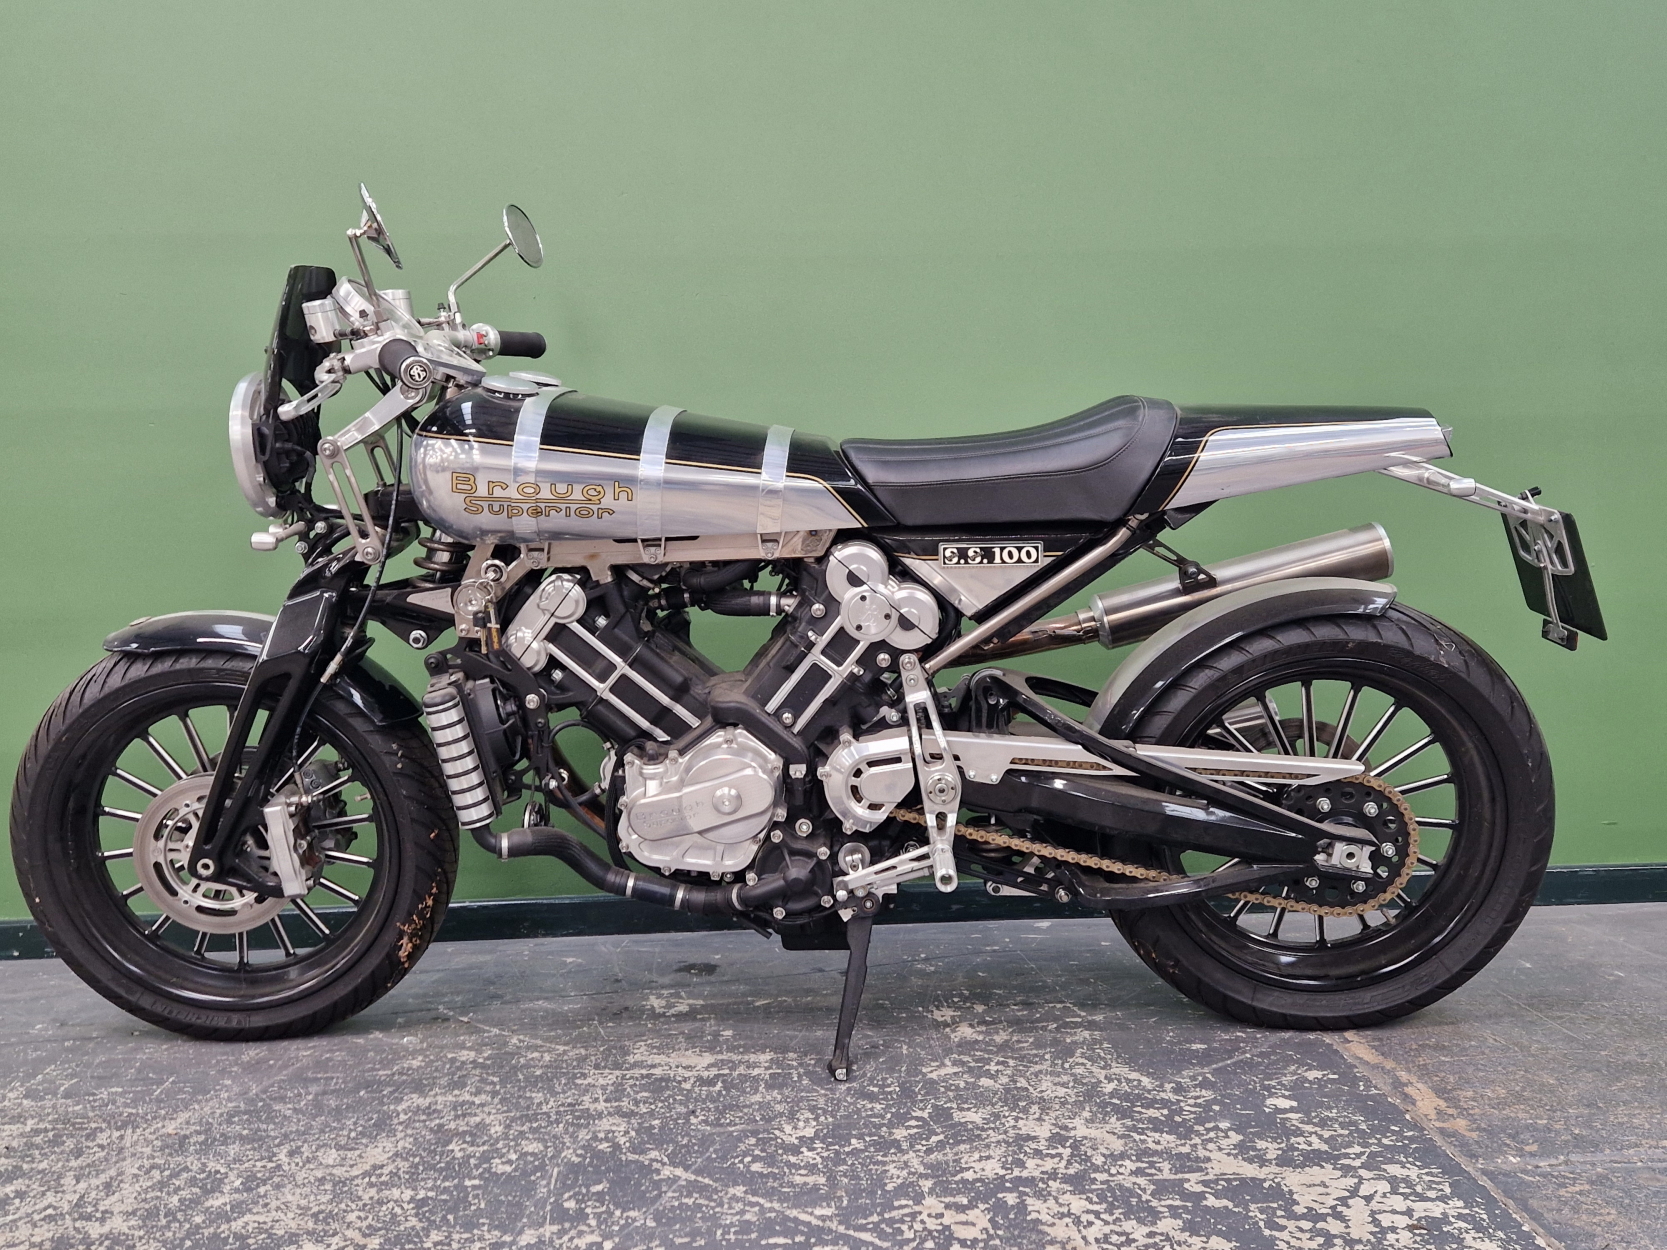 BROUGH SUPERIOR SS100 LTD EDITION- 1000CC REGISTRATION NUMBER WK67ASX- LTD. EDITION NUMBER 41 OF A - Image 2 of 2